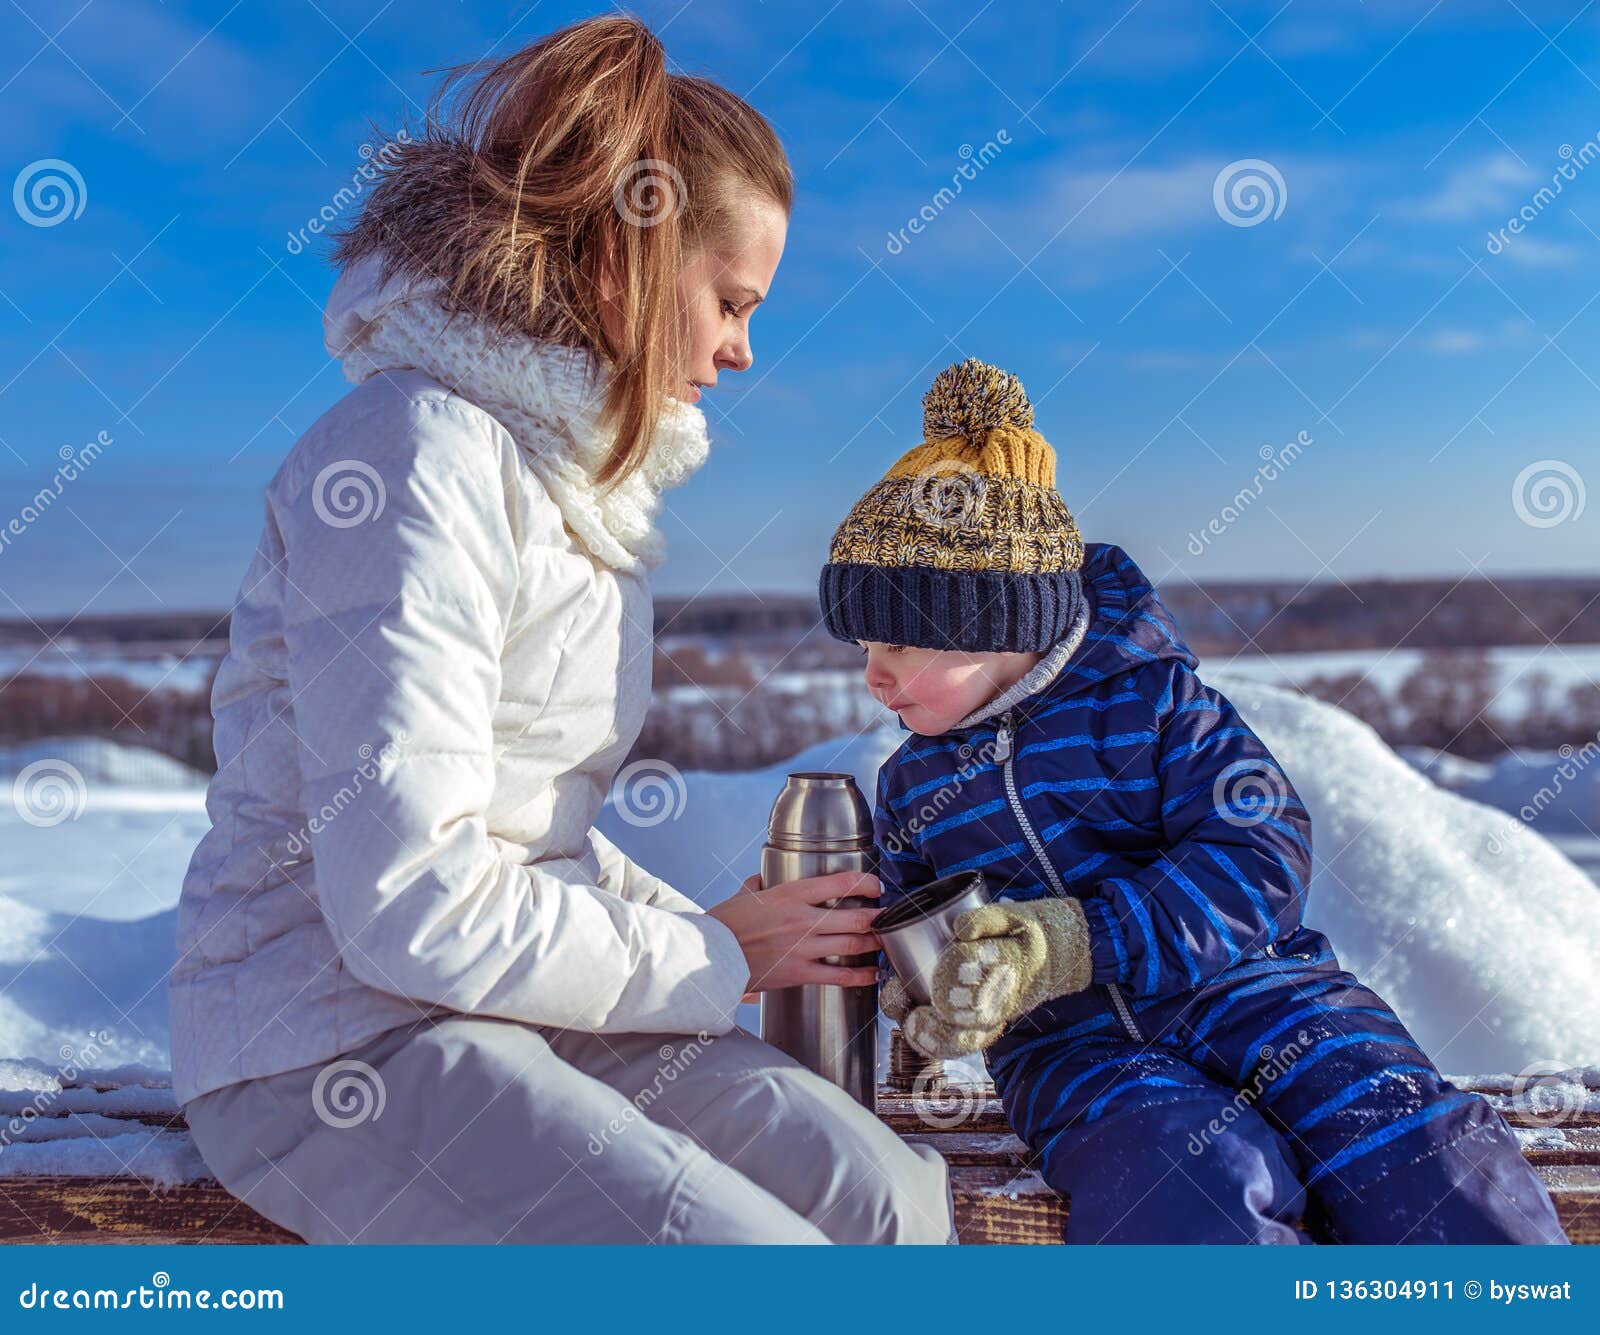 Mother with Son 3 Years Old, Sunny Day in Winter Outside in Park. Sits on a  Bench in the Hands of a Thermos with Hot Tea Stock Image - Image of person